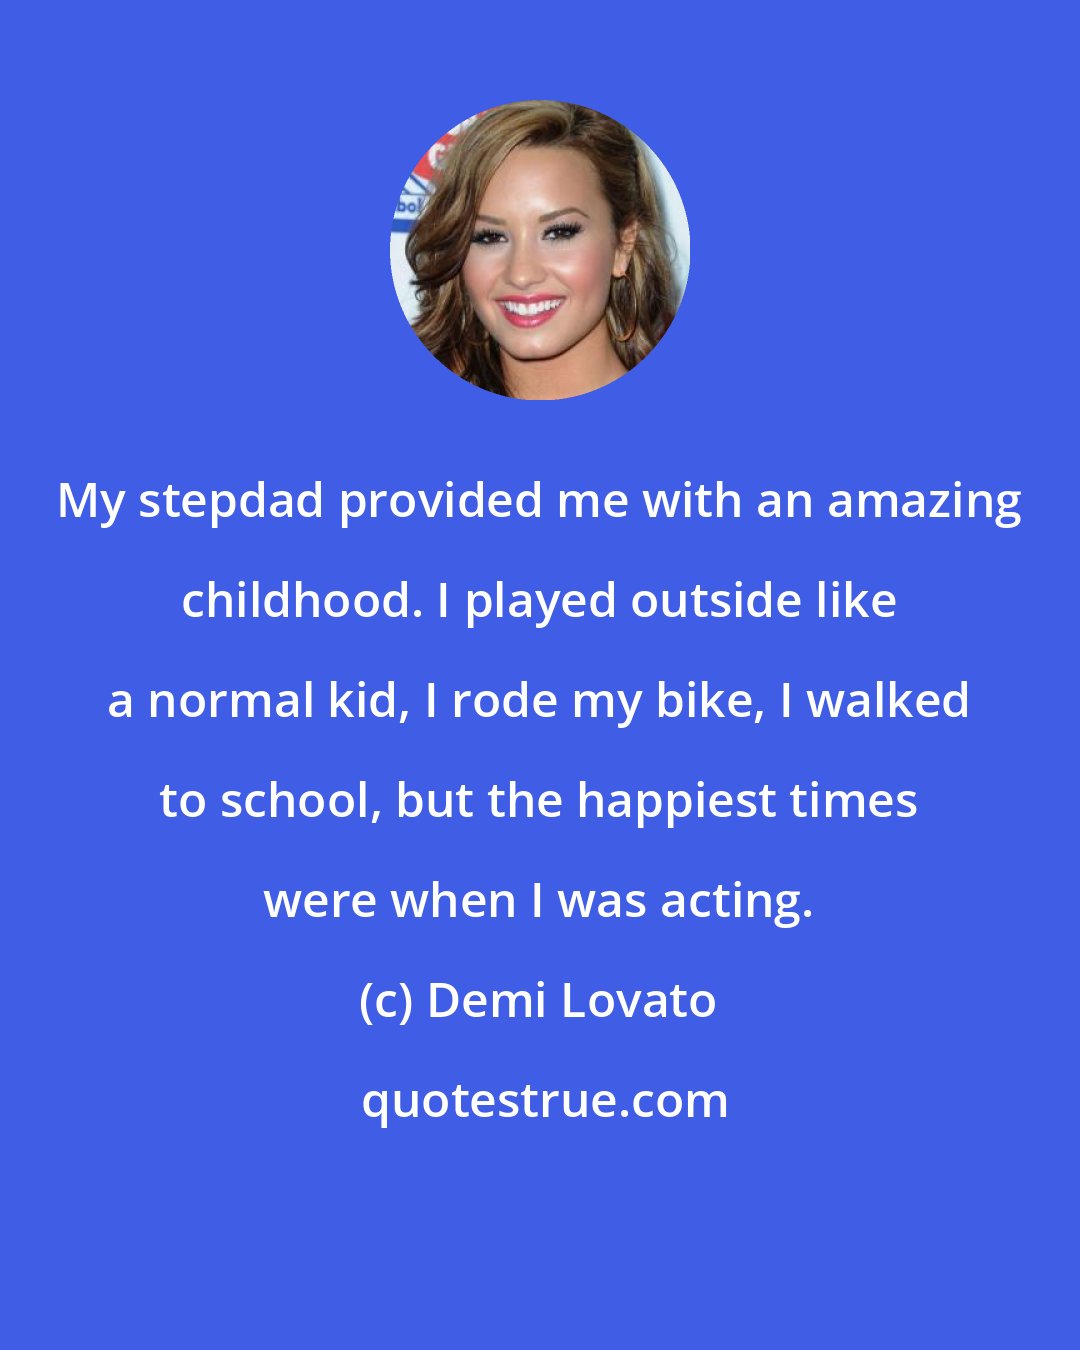 Demi Lovato: My stepdad provided me with an amazing childhood. I played outside like a normal kid, I rode my bike, I walked to school, but the happiest times were when I was acting.